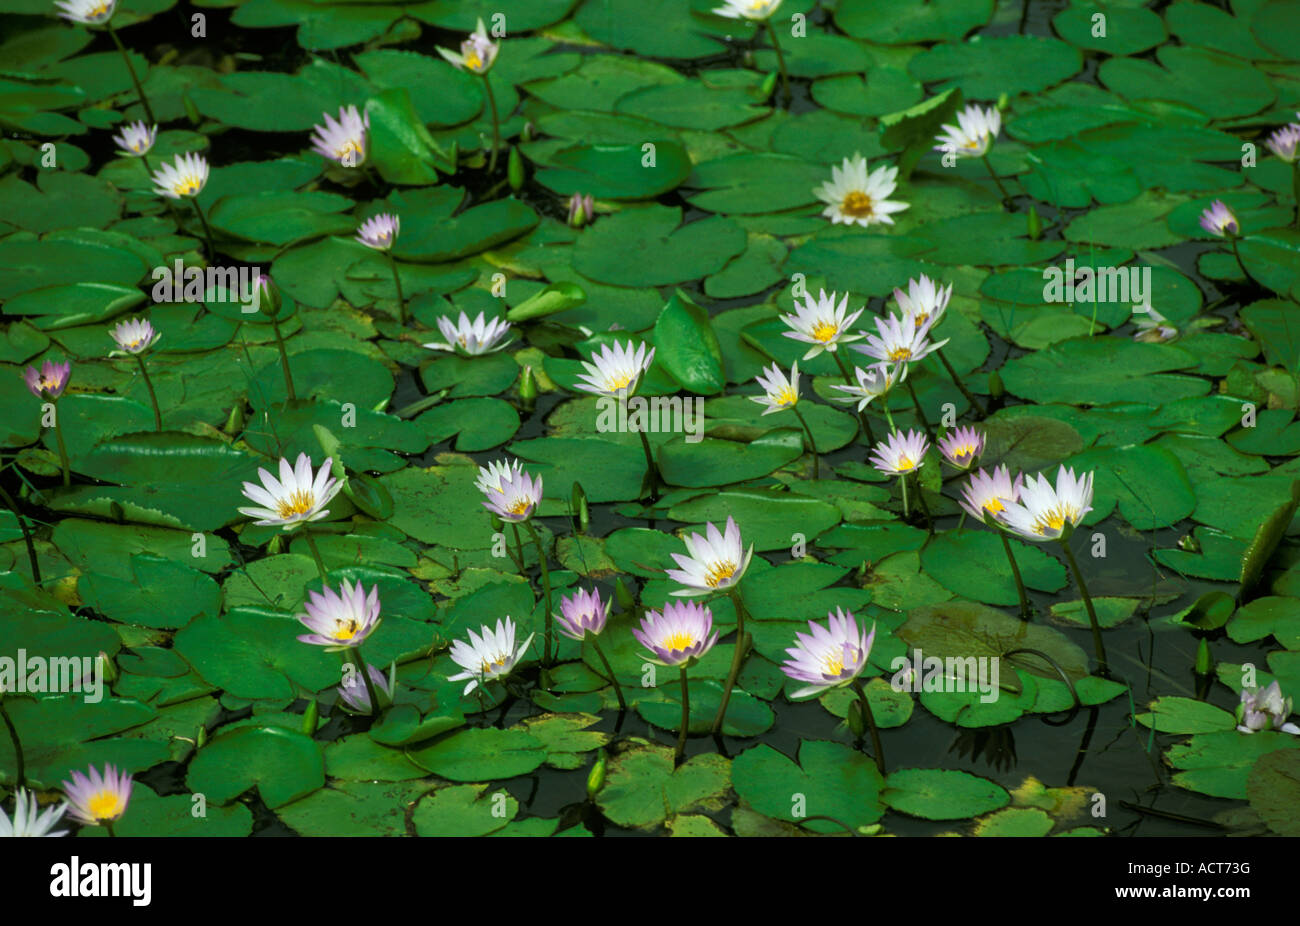 Water lilies with lilac tinged flowers covering the surface of the water Okavango delta Botswana Stock Photo